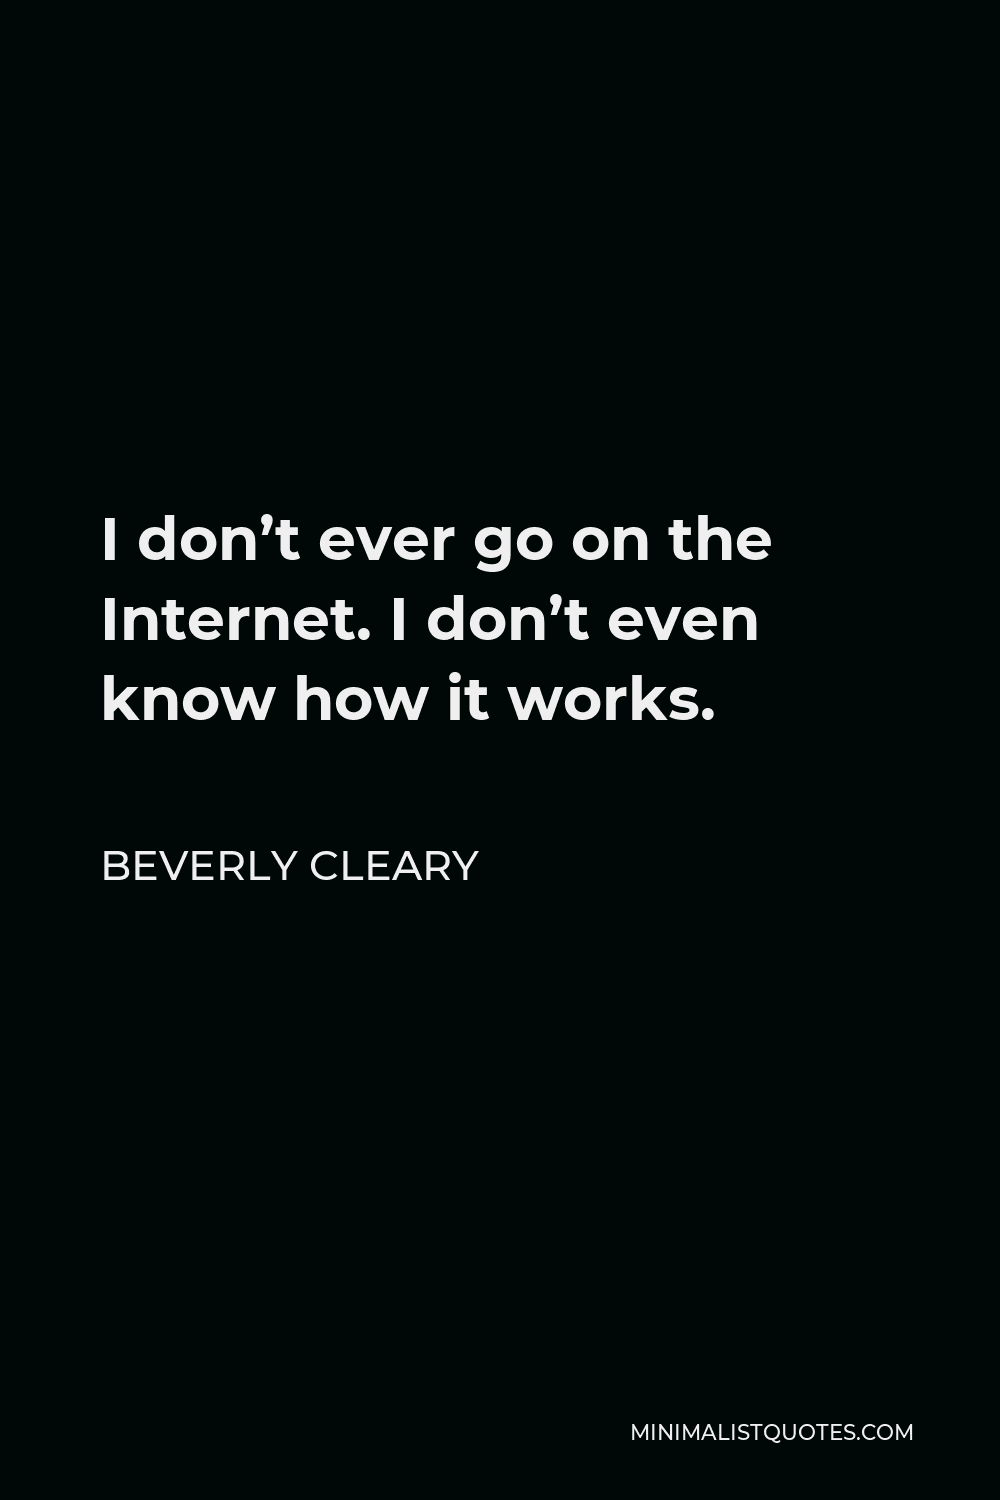 Beverly Cleary Quote - I don’t ever go on the Internet. I don’t even know how it works.